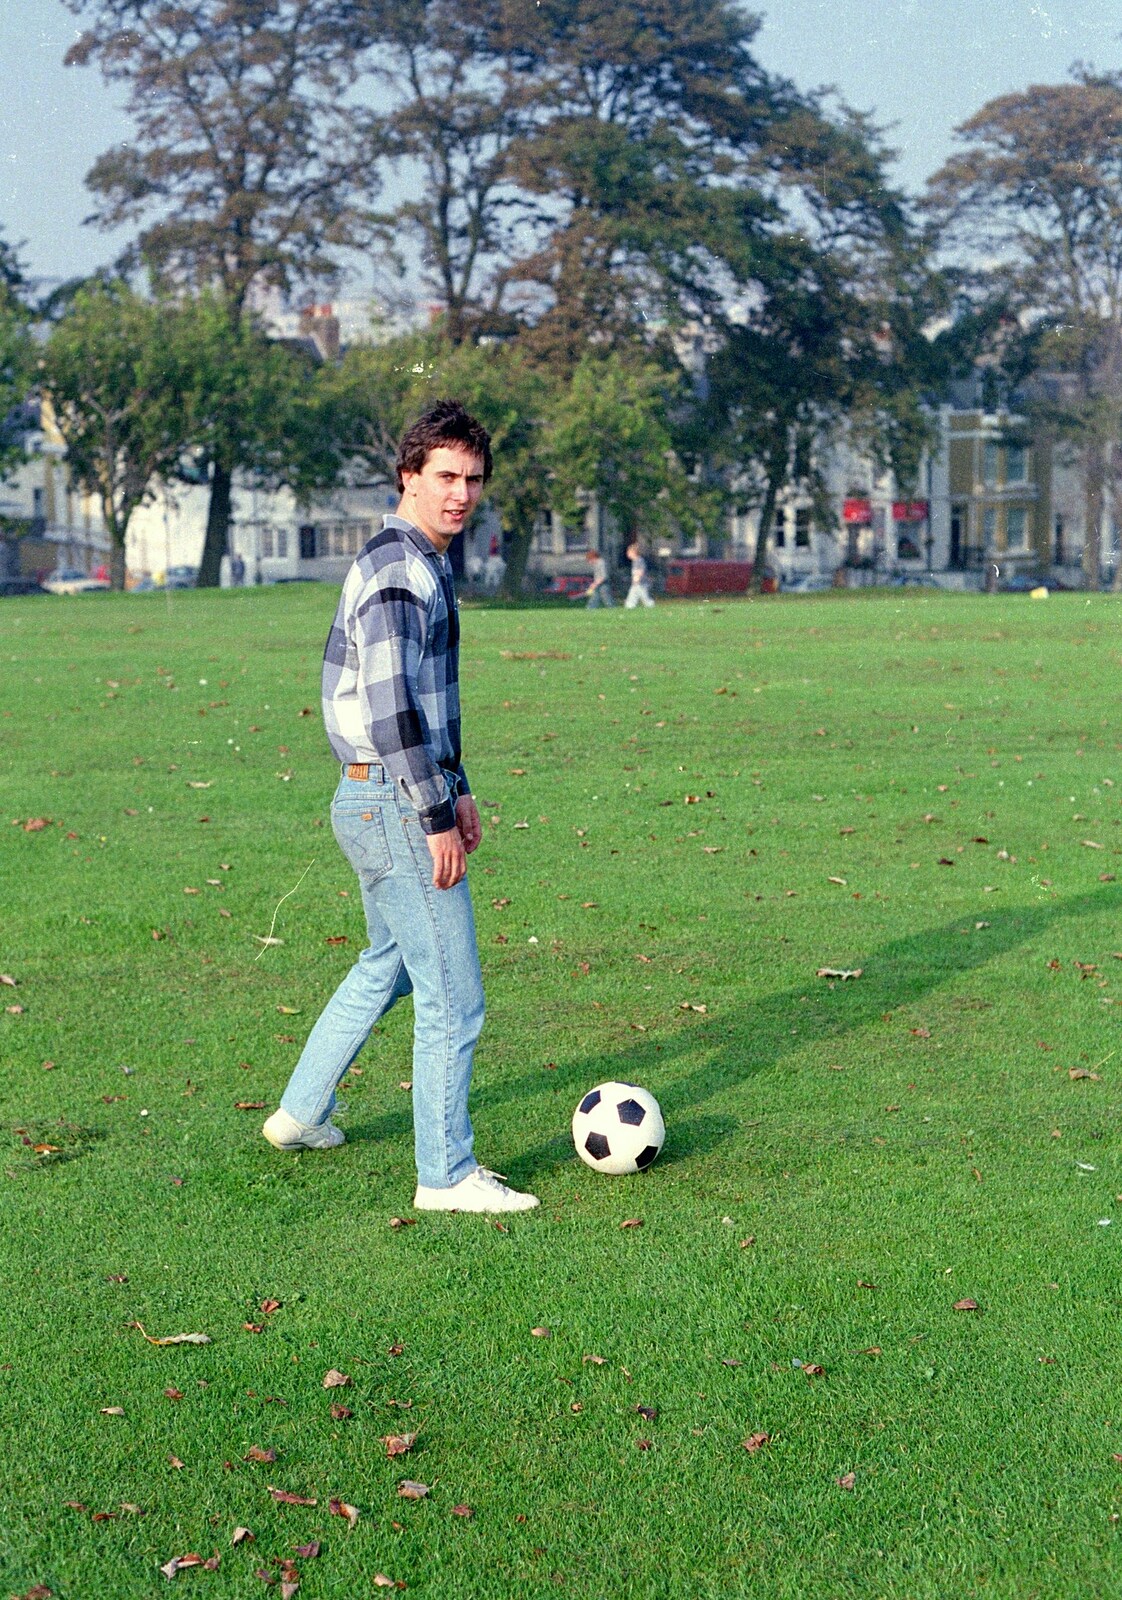 Riki prepares to kick the ball from Uni: A Plymouth Hoe Kickabout, Plymouth, Devon - 20th October 1986